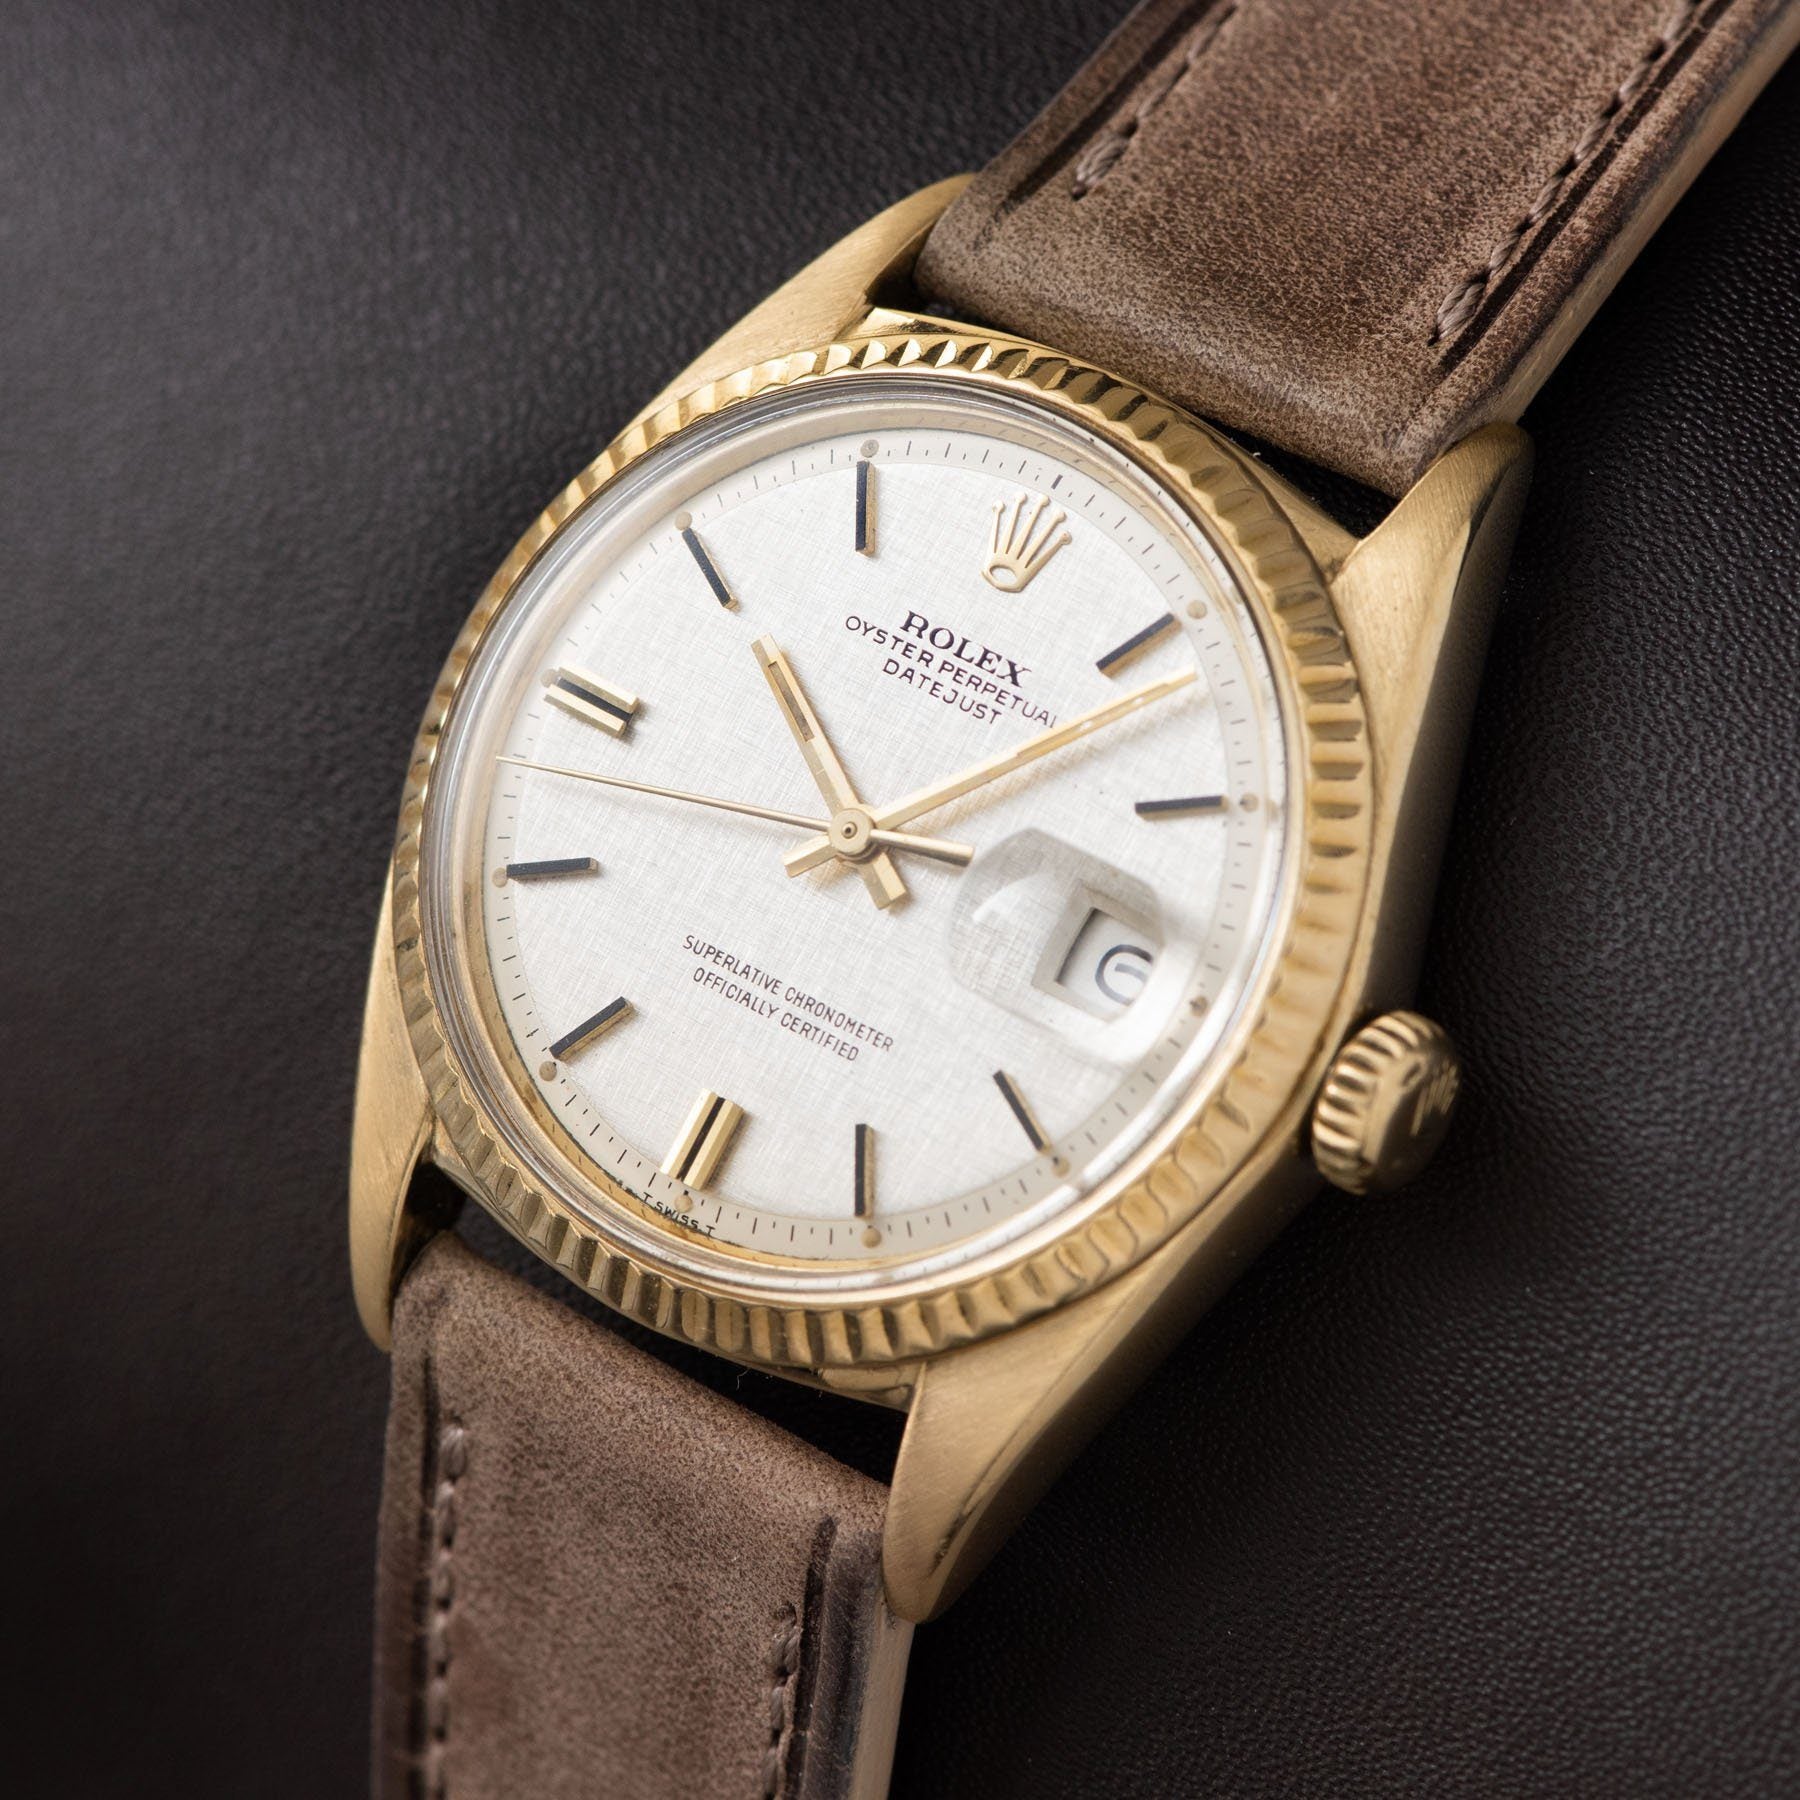 Authentic Used Jaeger-LeCoultre Geophysic 1958 Limited Edition Q8008520  Watch (10-10-JLC-MB52ZL)